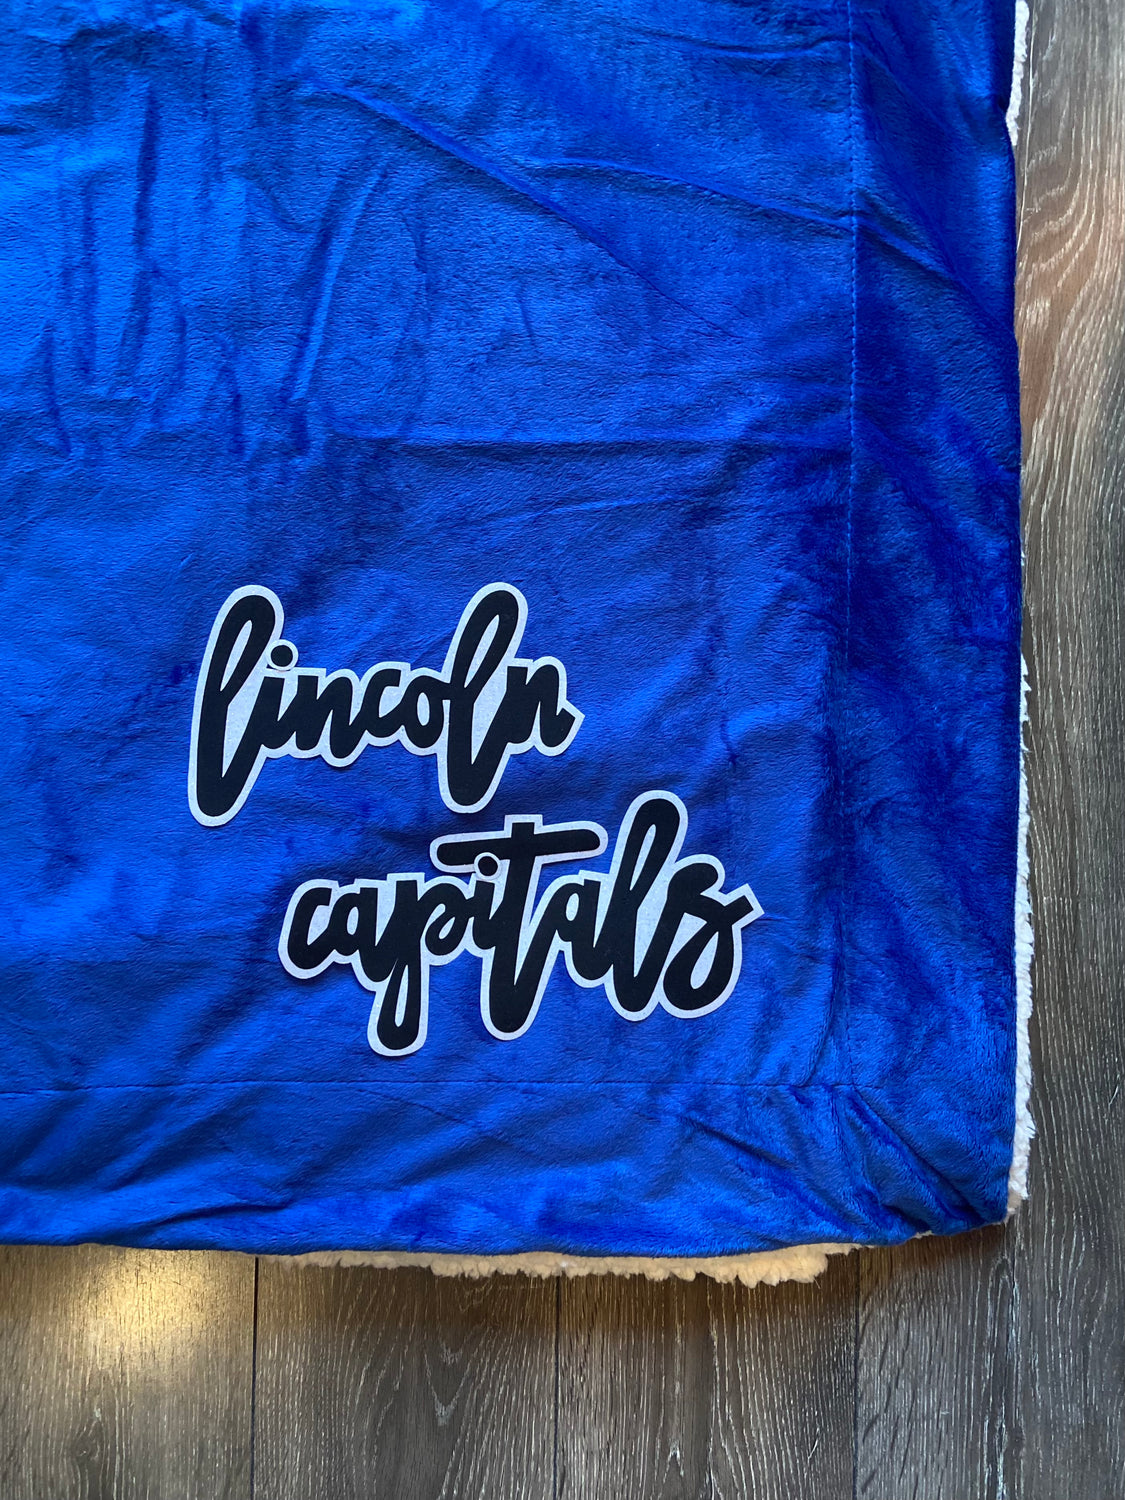 LINCOLN CAPITALS - BLUE SHERPA BLANKET